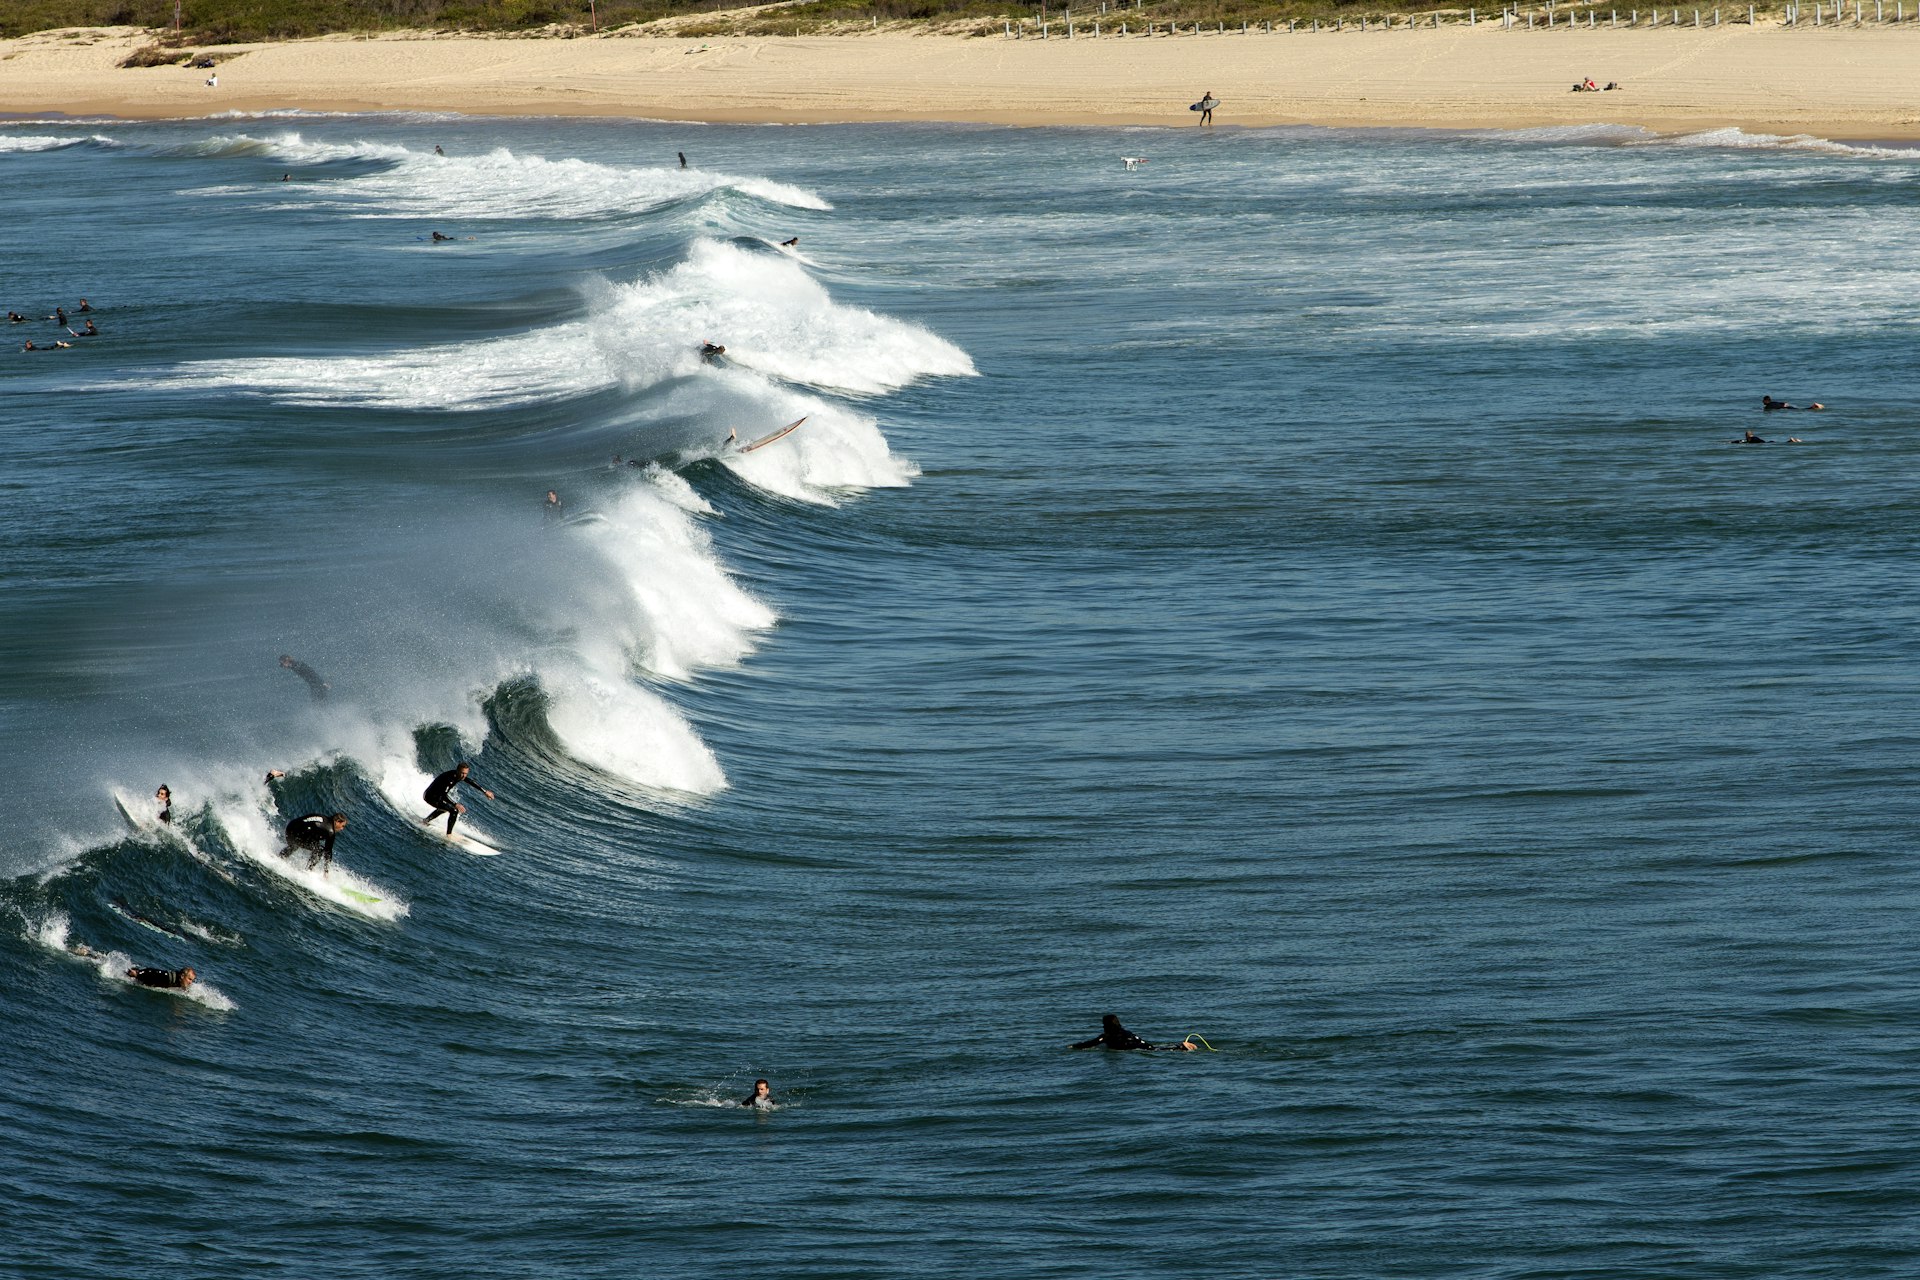 Surfers on a wave at Maroubra Beach in Sydney, Australia